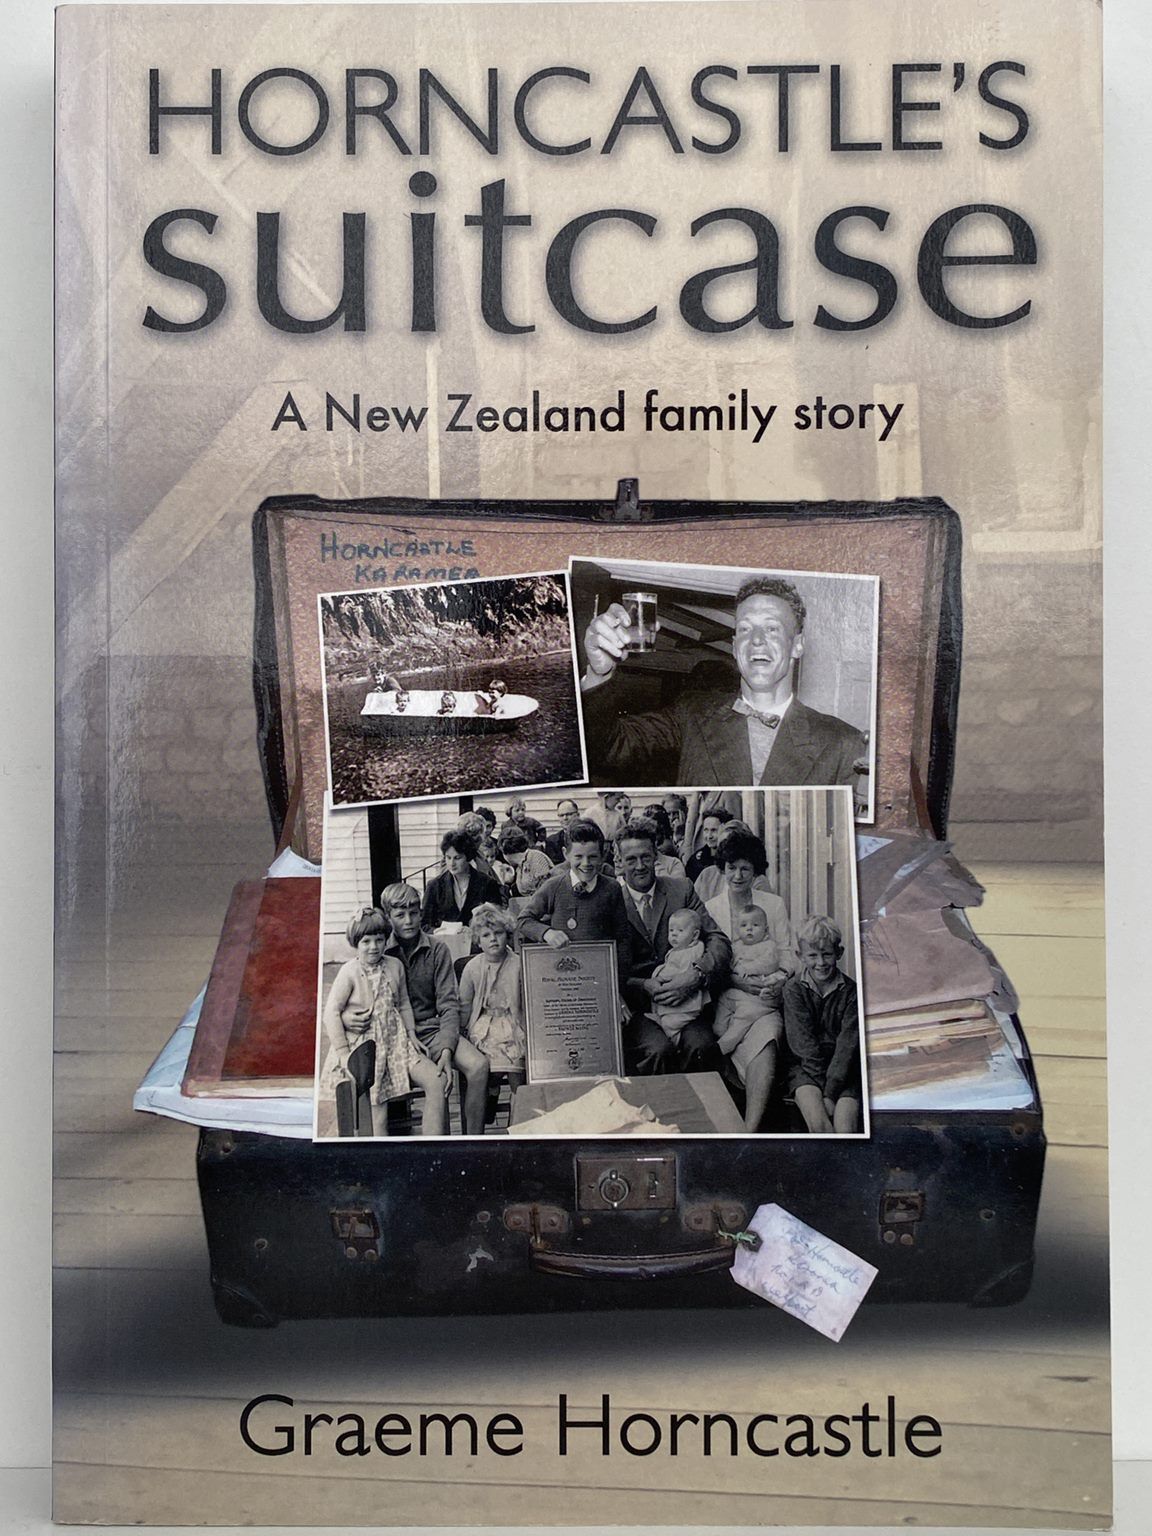 HORNCASTLE'S SUITCASE: A New Zealand family story